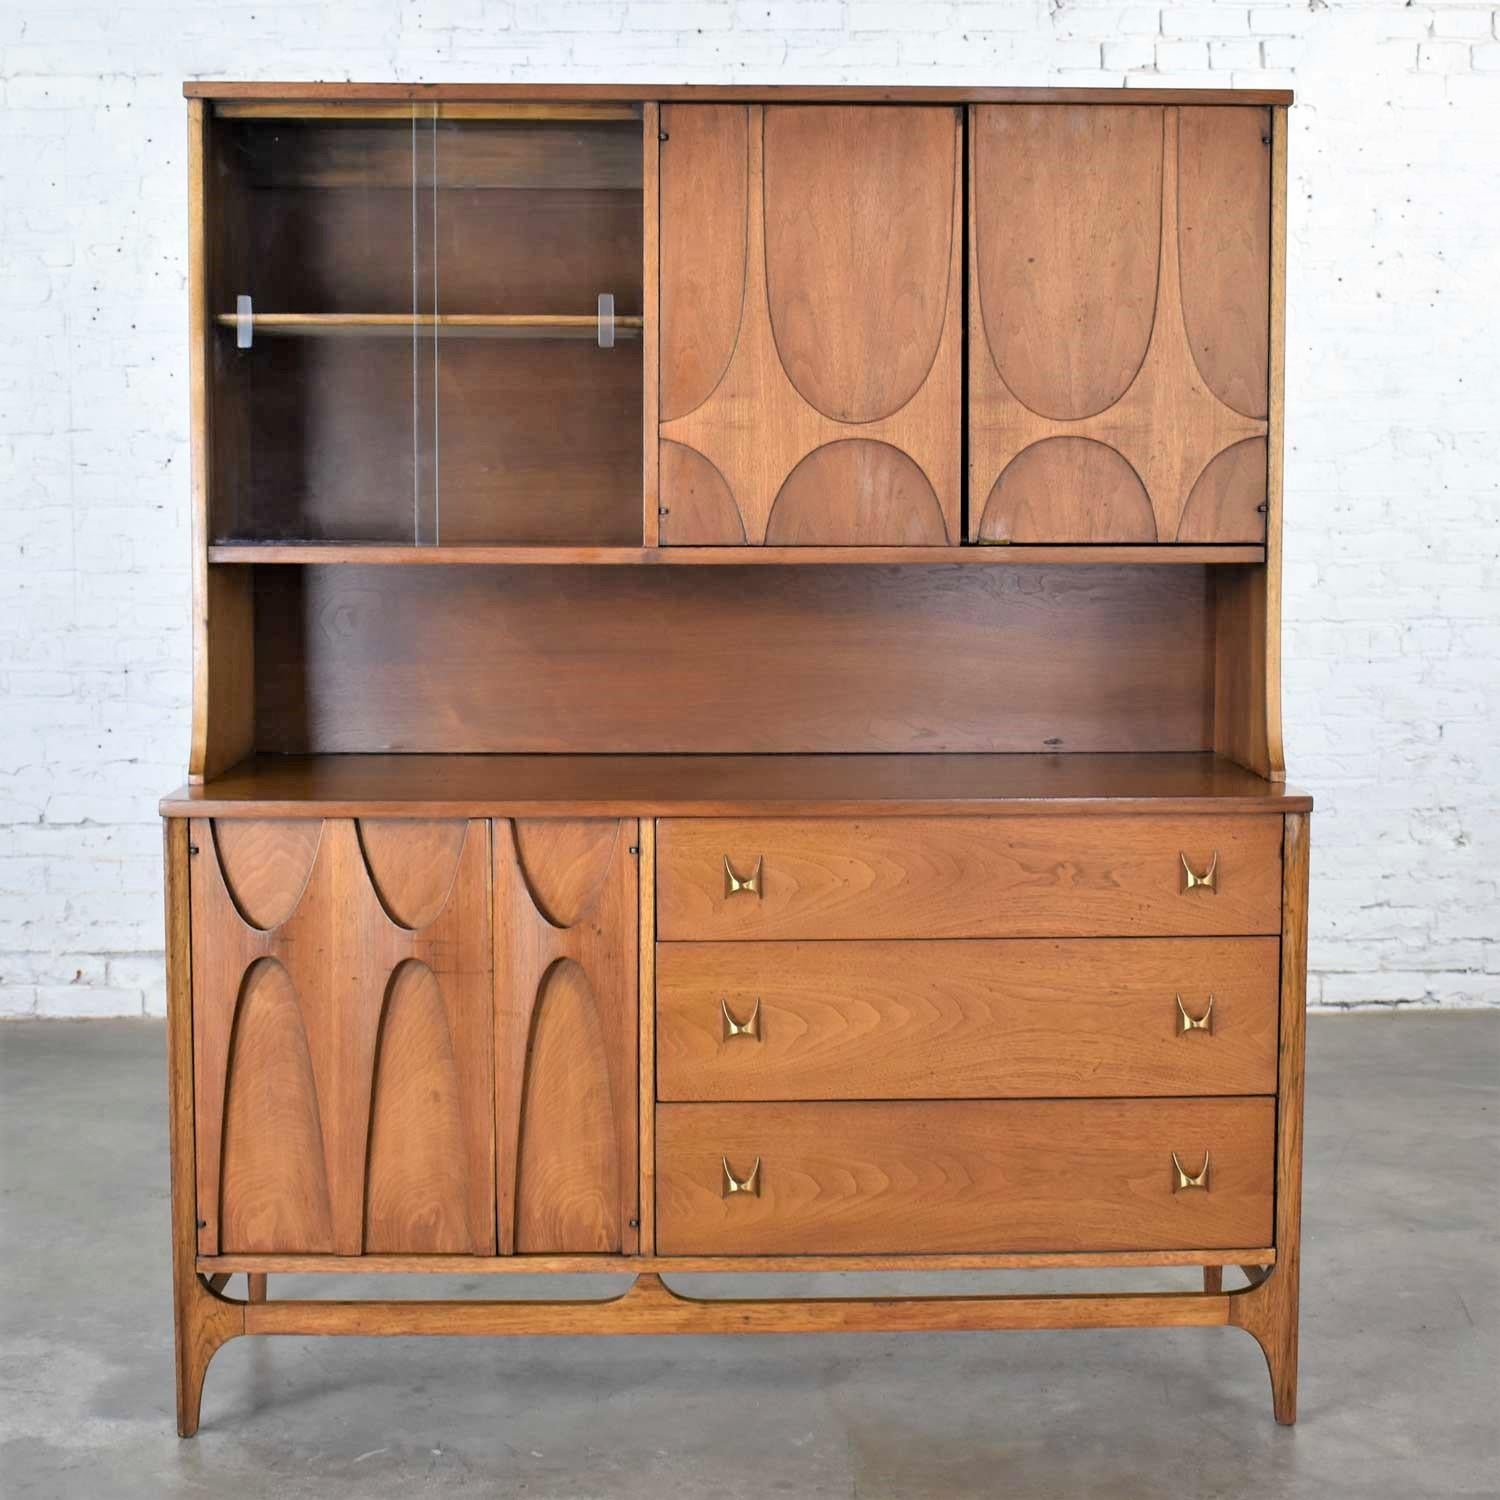 Handsome Broyhill Brasilia Mid-Century Modern two-piece walnut display cabinet consisting of buffet with detachable china hutch. It is in good vintage condition. It is not perfect. We have restored the finish but have not refinished this cabinet. We